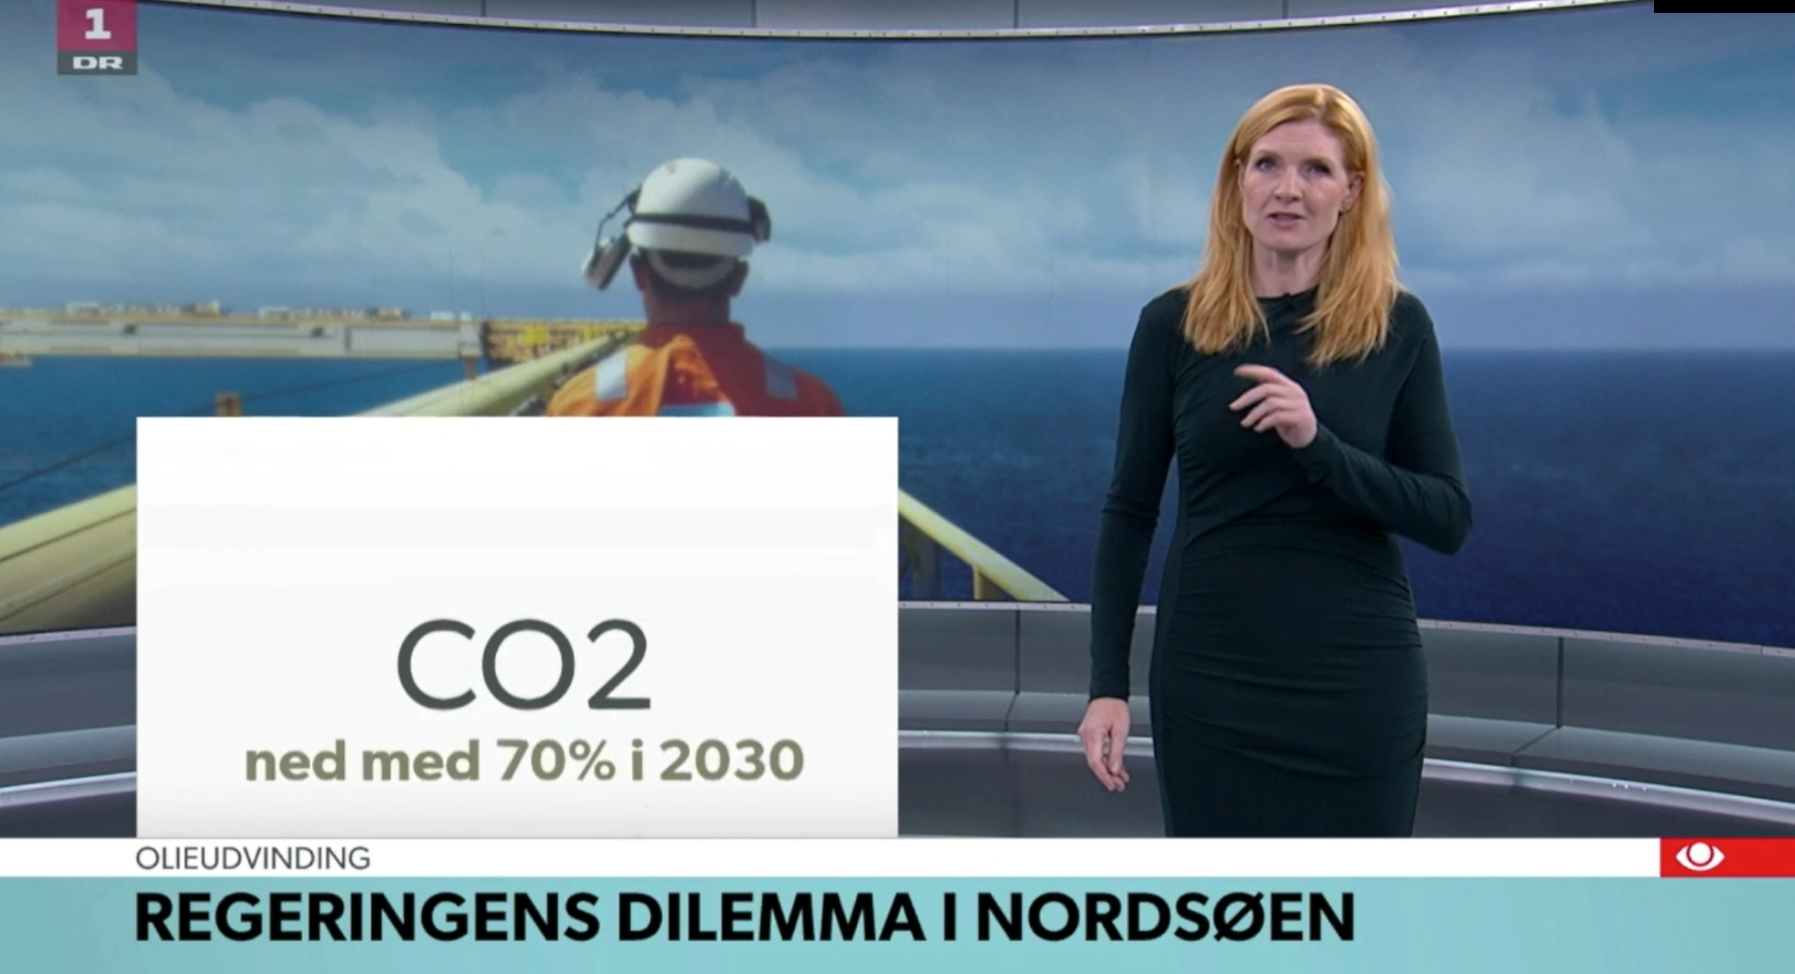 Denmark could be close to phasing out oil and gas extraction. Here’s why it would matter.